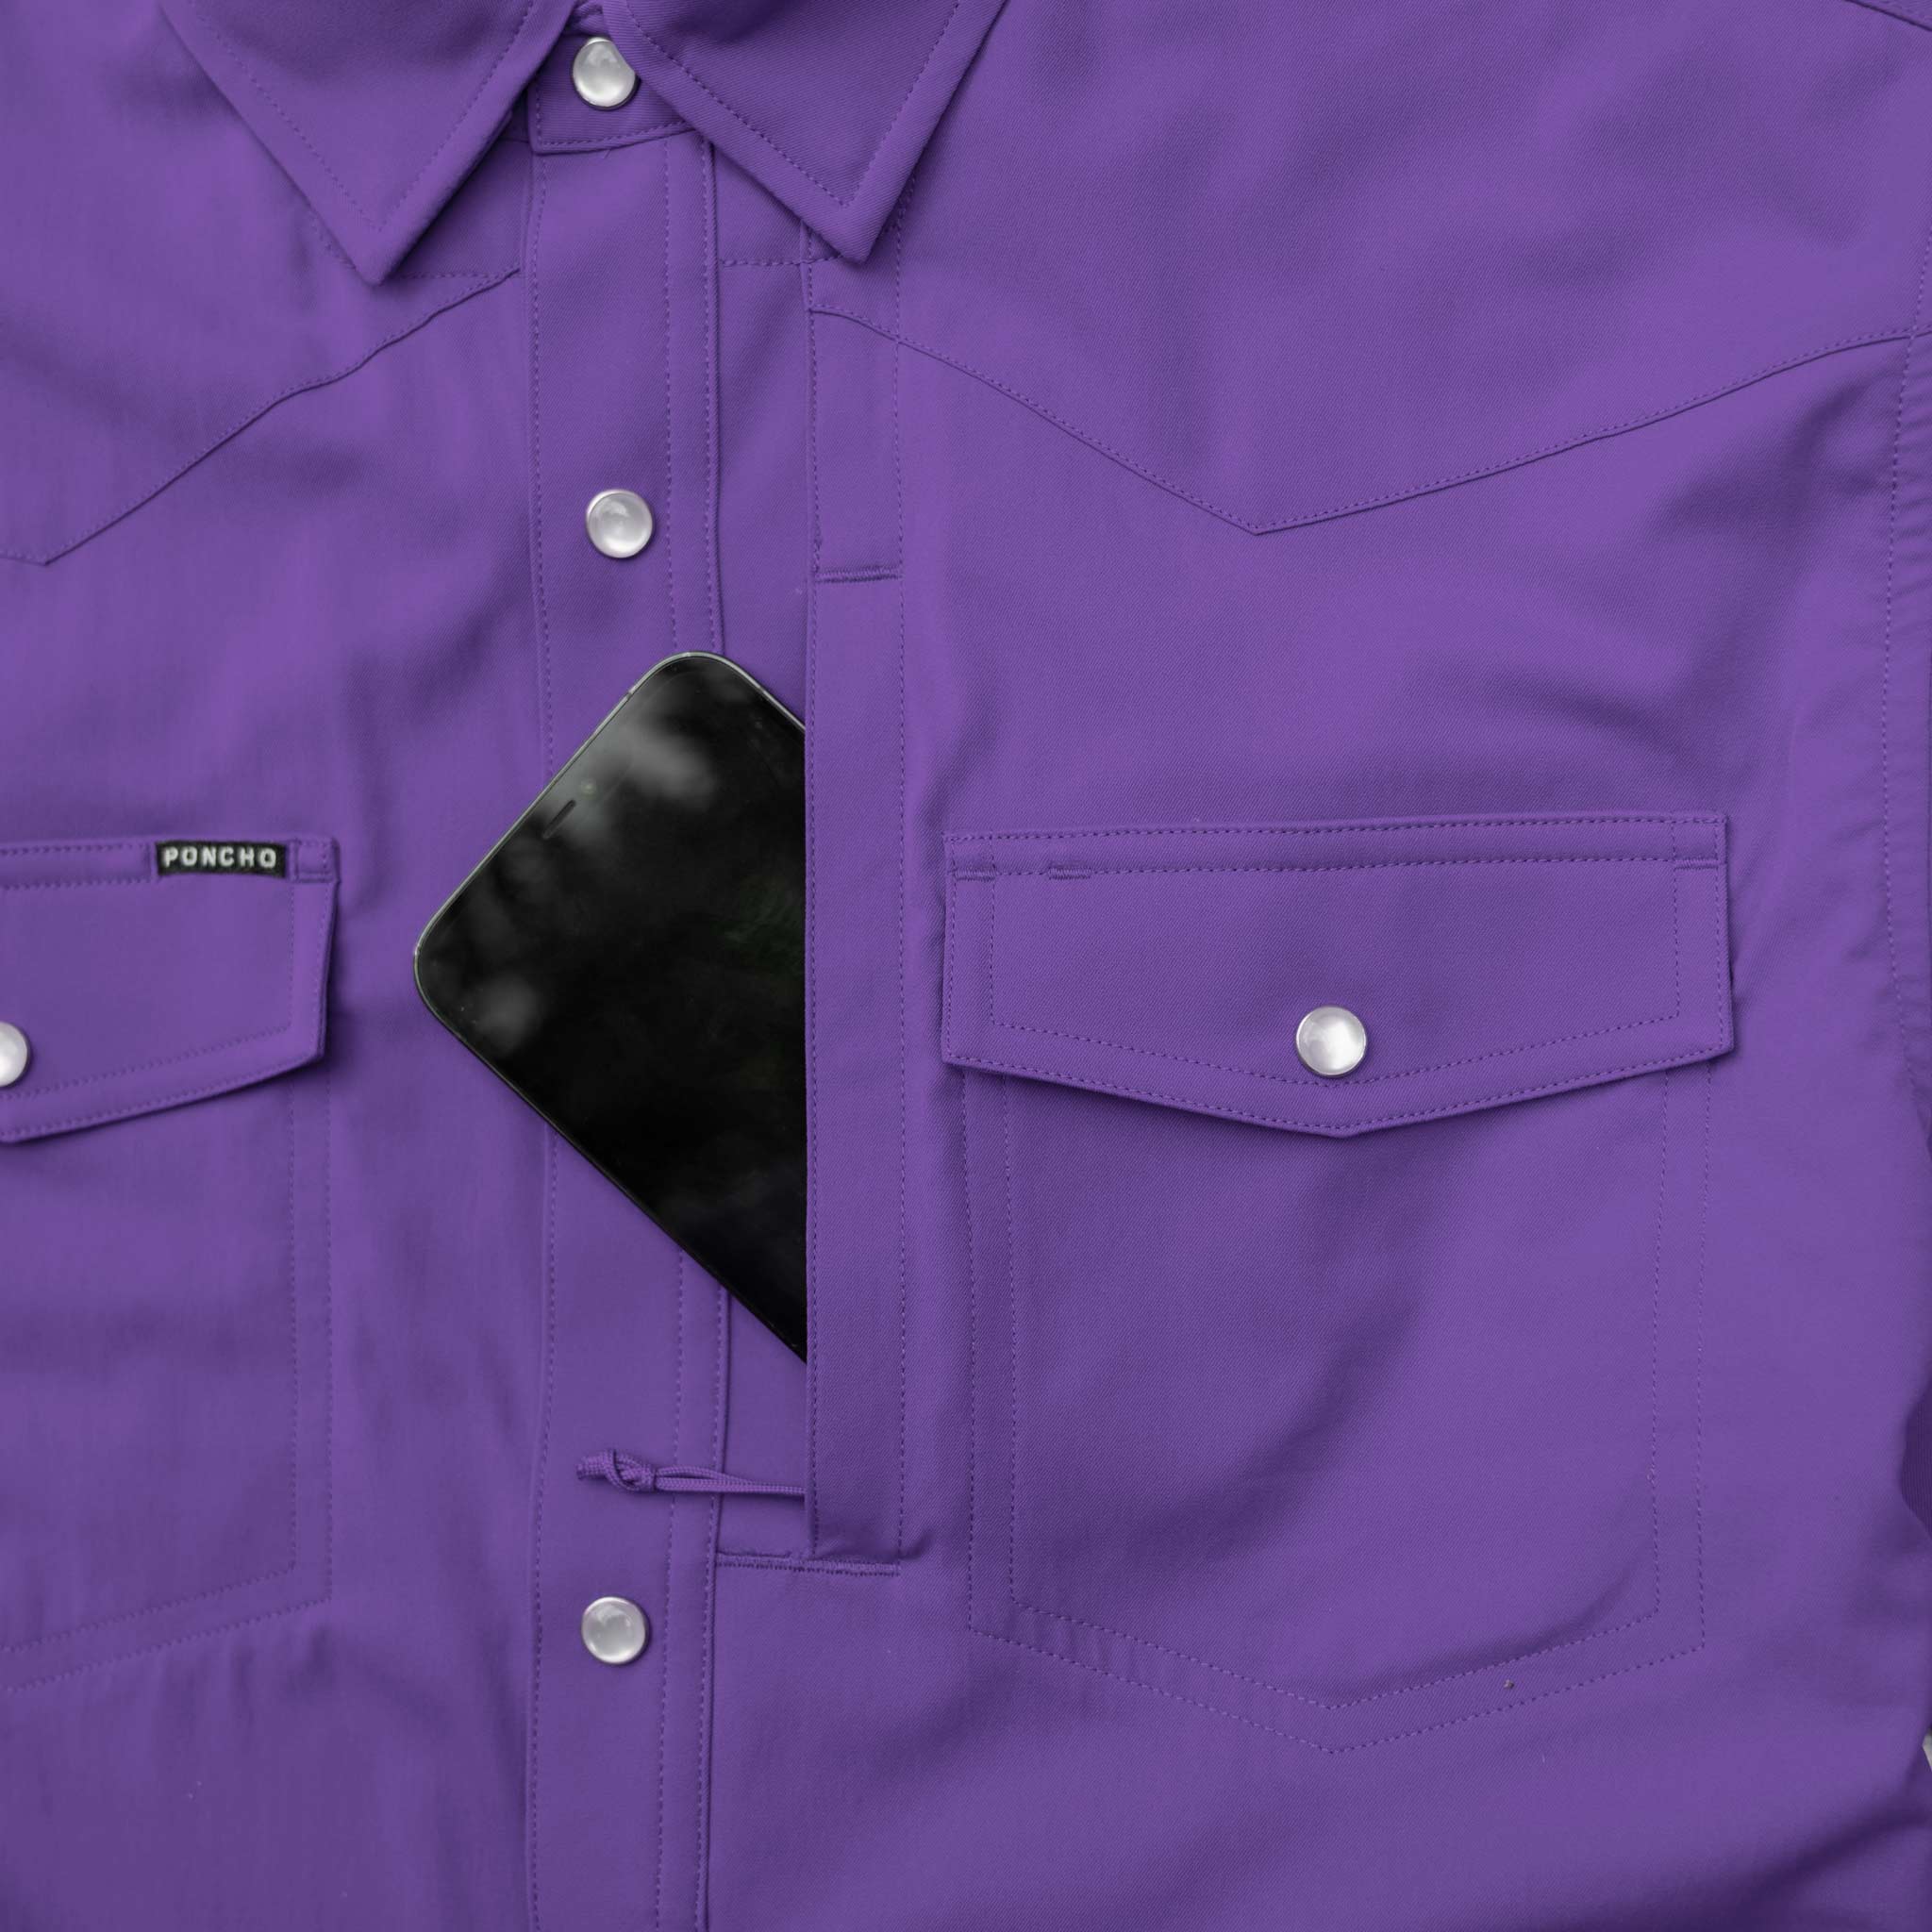 Poncho Pearl Snap Western | Solid Purple Short Sleeve